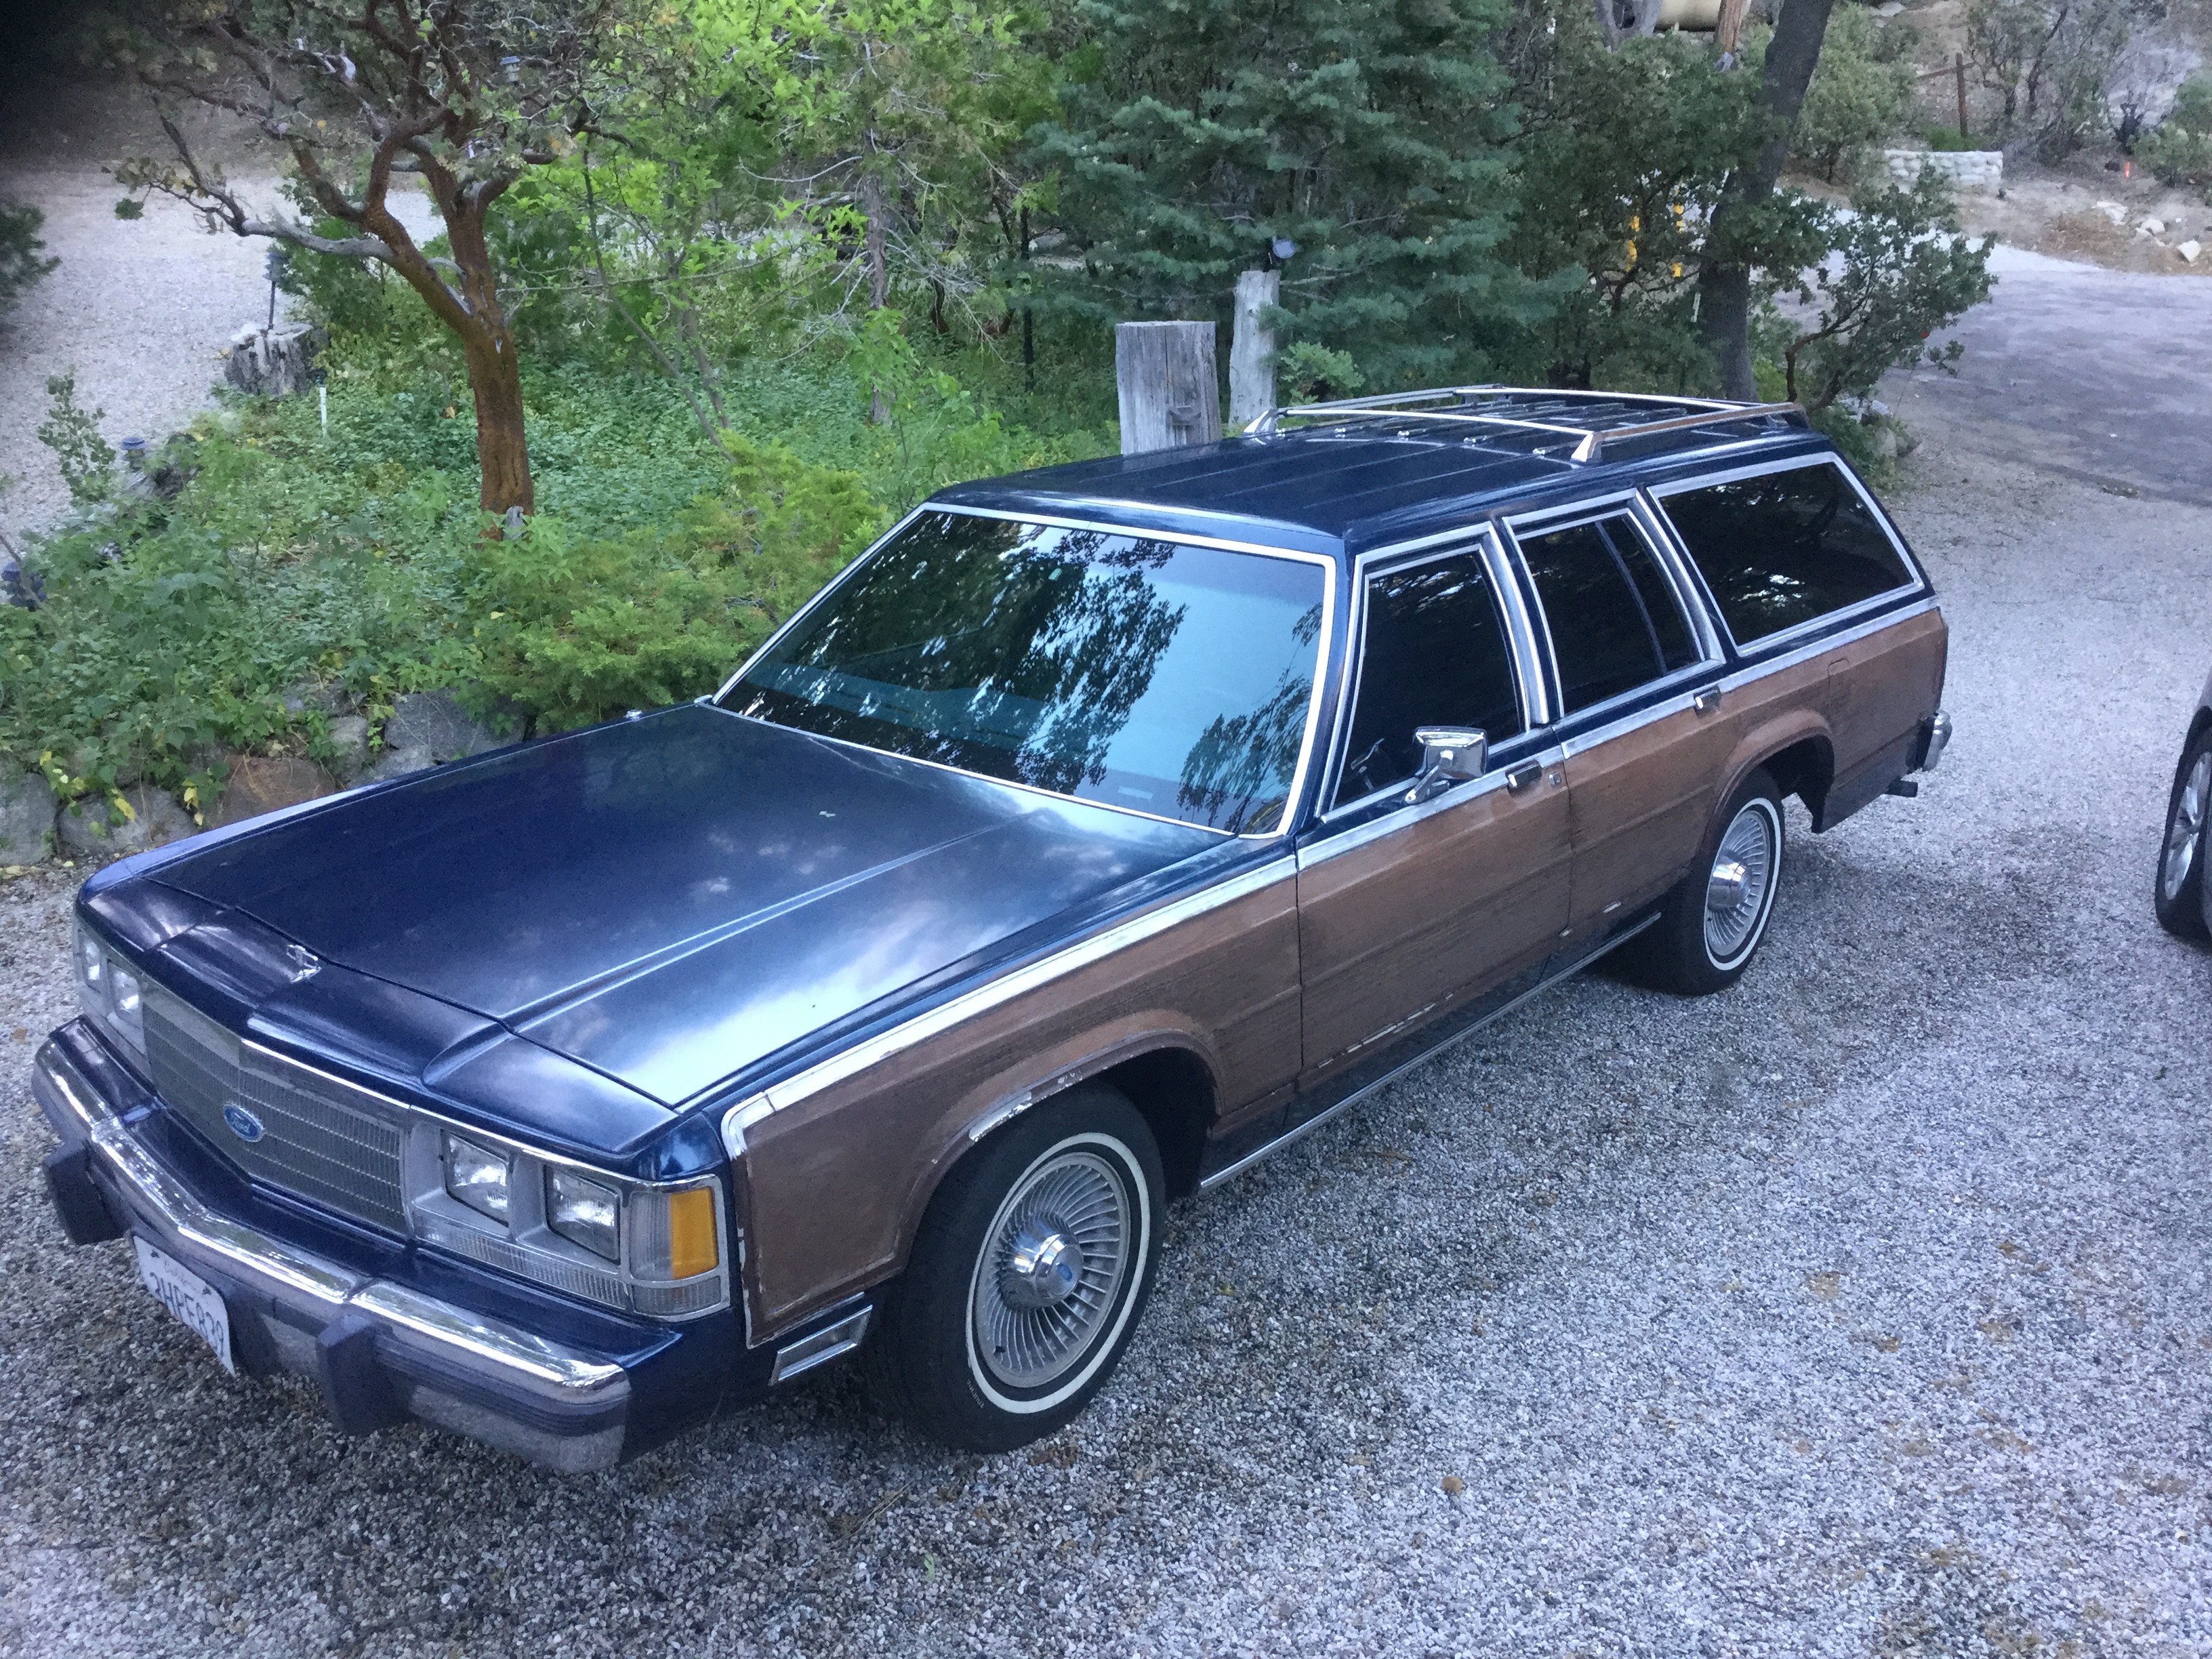 Ford Crown Victoria Country Squire 8 Passenger Wagon Hire Palm Springs Ca